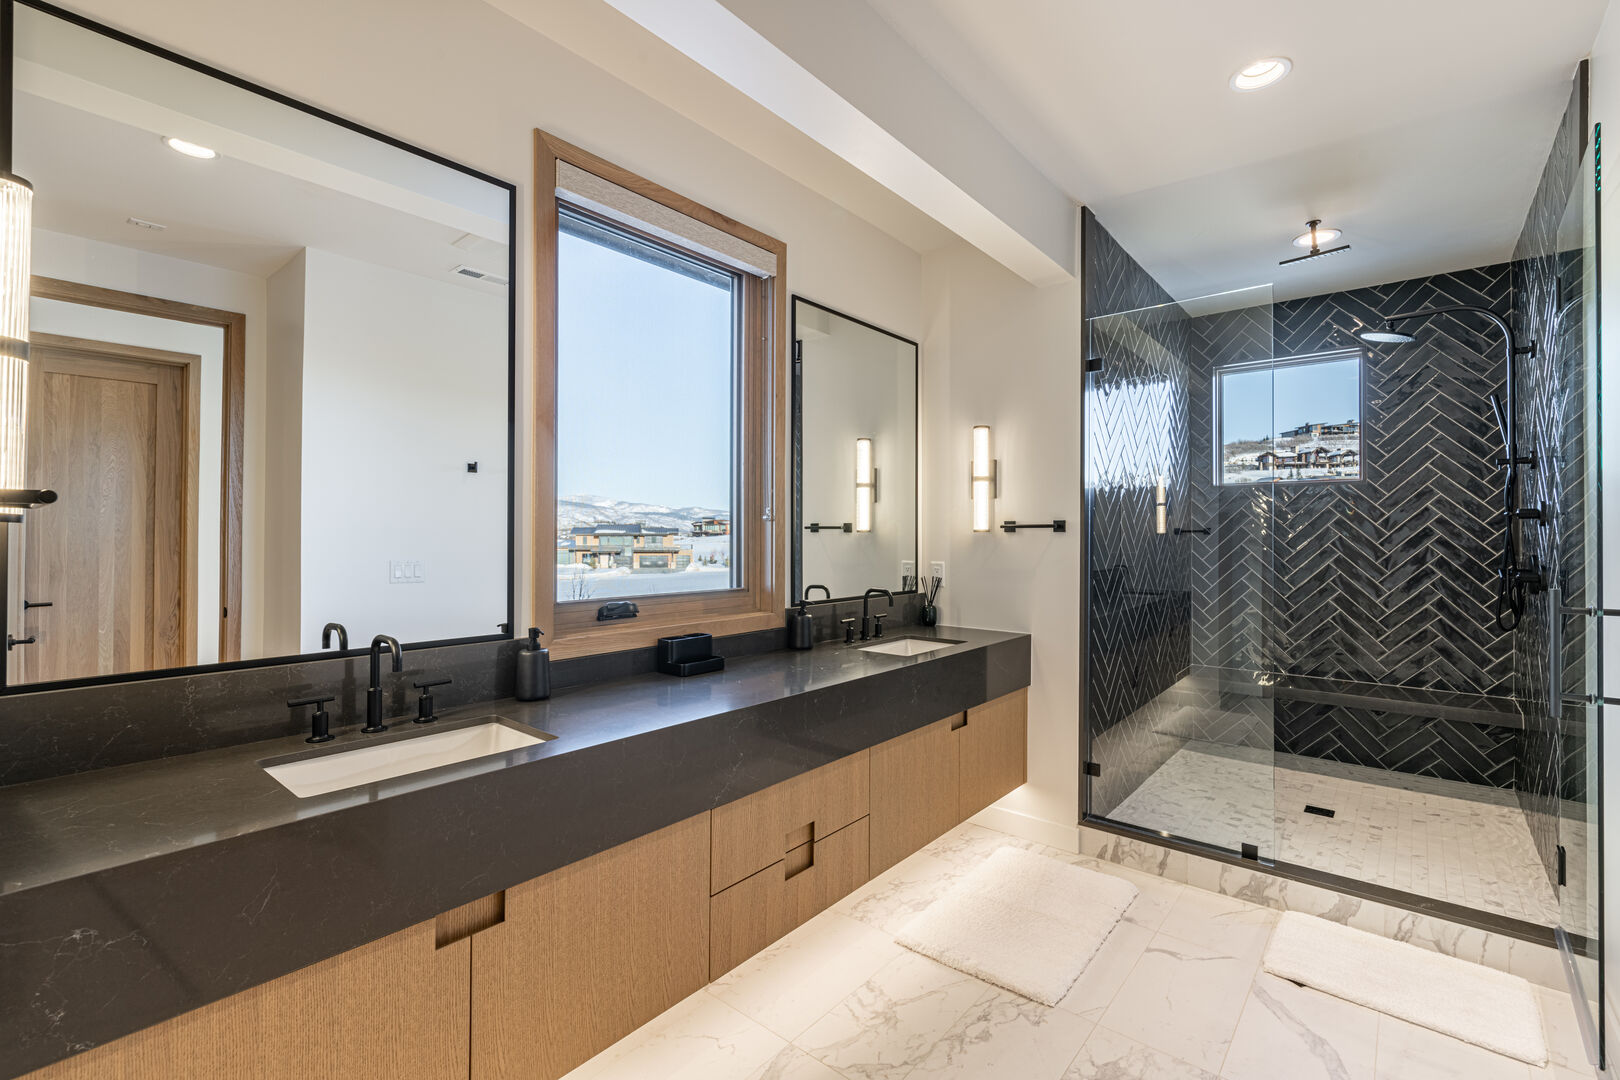 Double vanity and spacious shower.